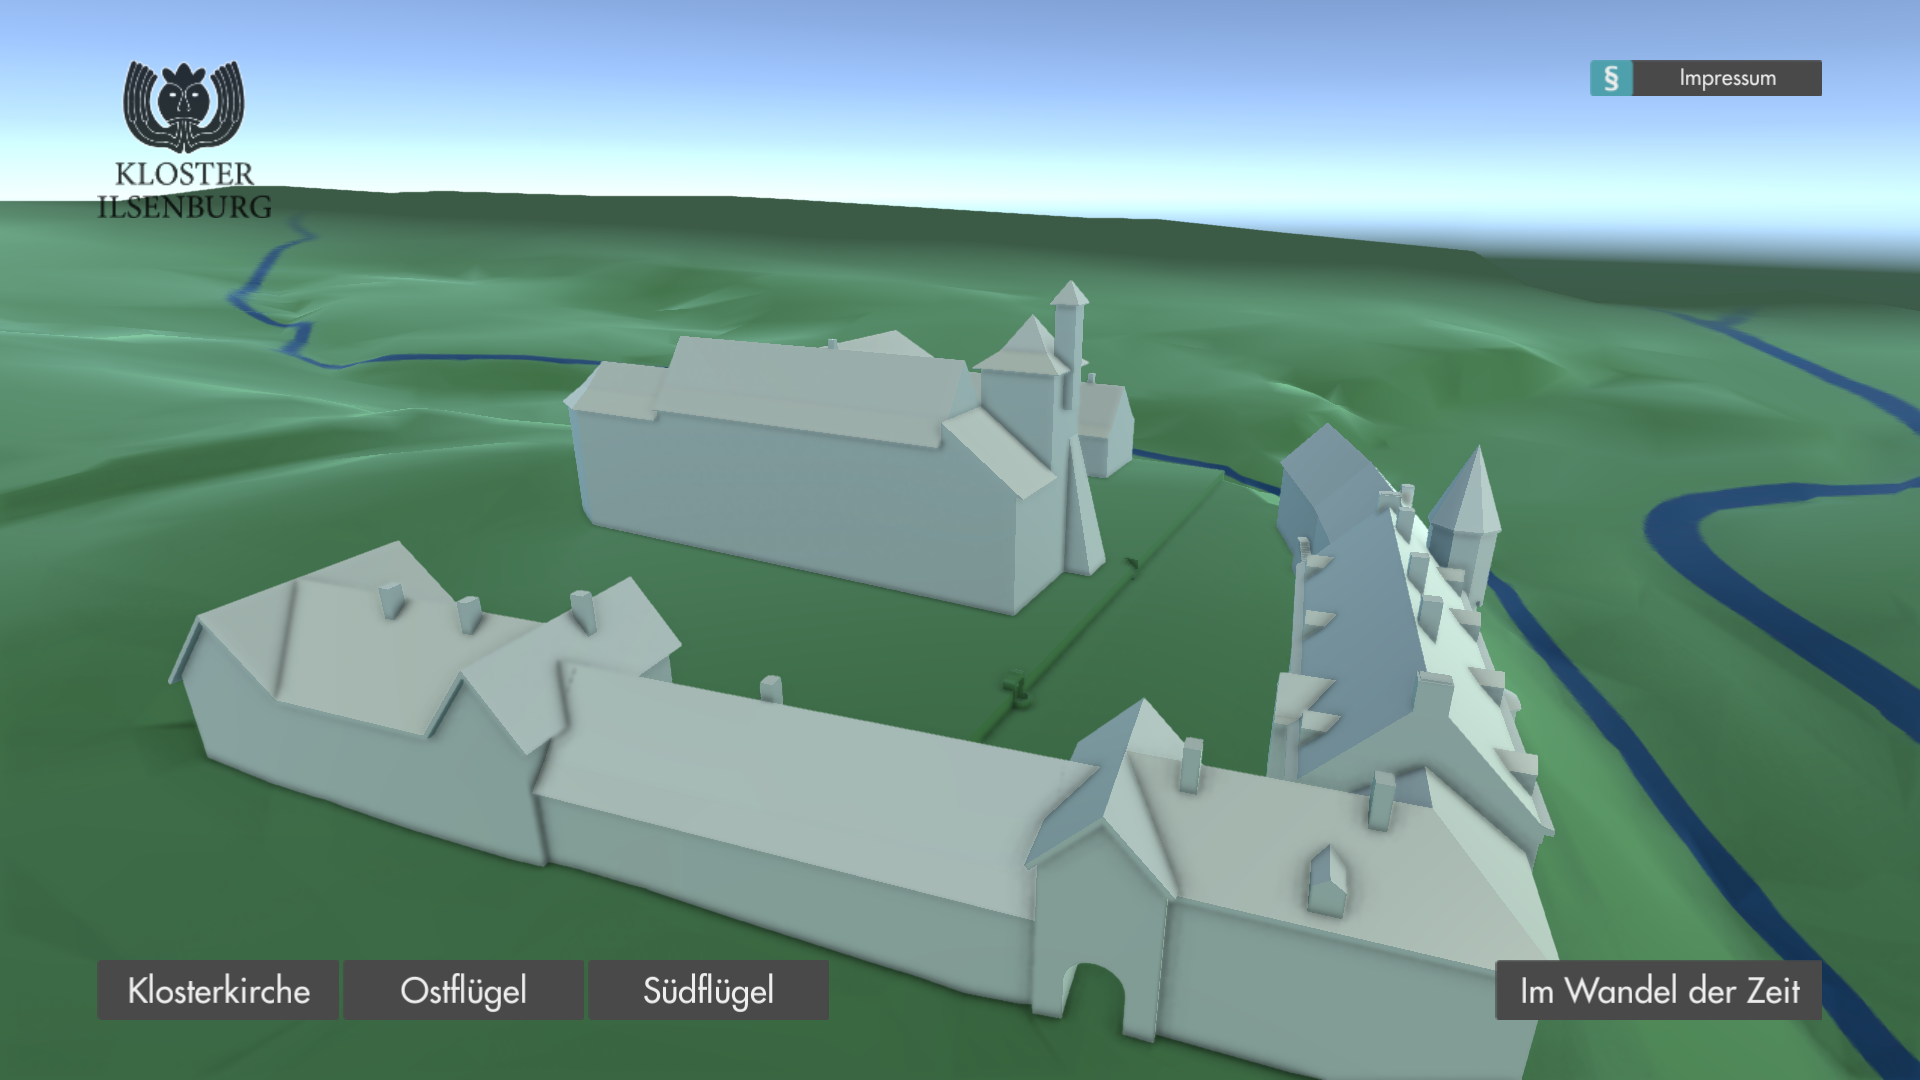 Screenshot of the Ilsenburg Abbey application that shows the overview. The camera rotates around a 3D rendered model of the Ilsenburg Abbey and its surrounding landscape. The logo of the monastery appears in the upper left corner. The upper right corner contains a button to show the credits. At the bottom of the screen are several buttons with German text: 'Klosterkirche', 'Ostflügel', 'Südflügel' and 'Im Wandel der Zeit'.